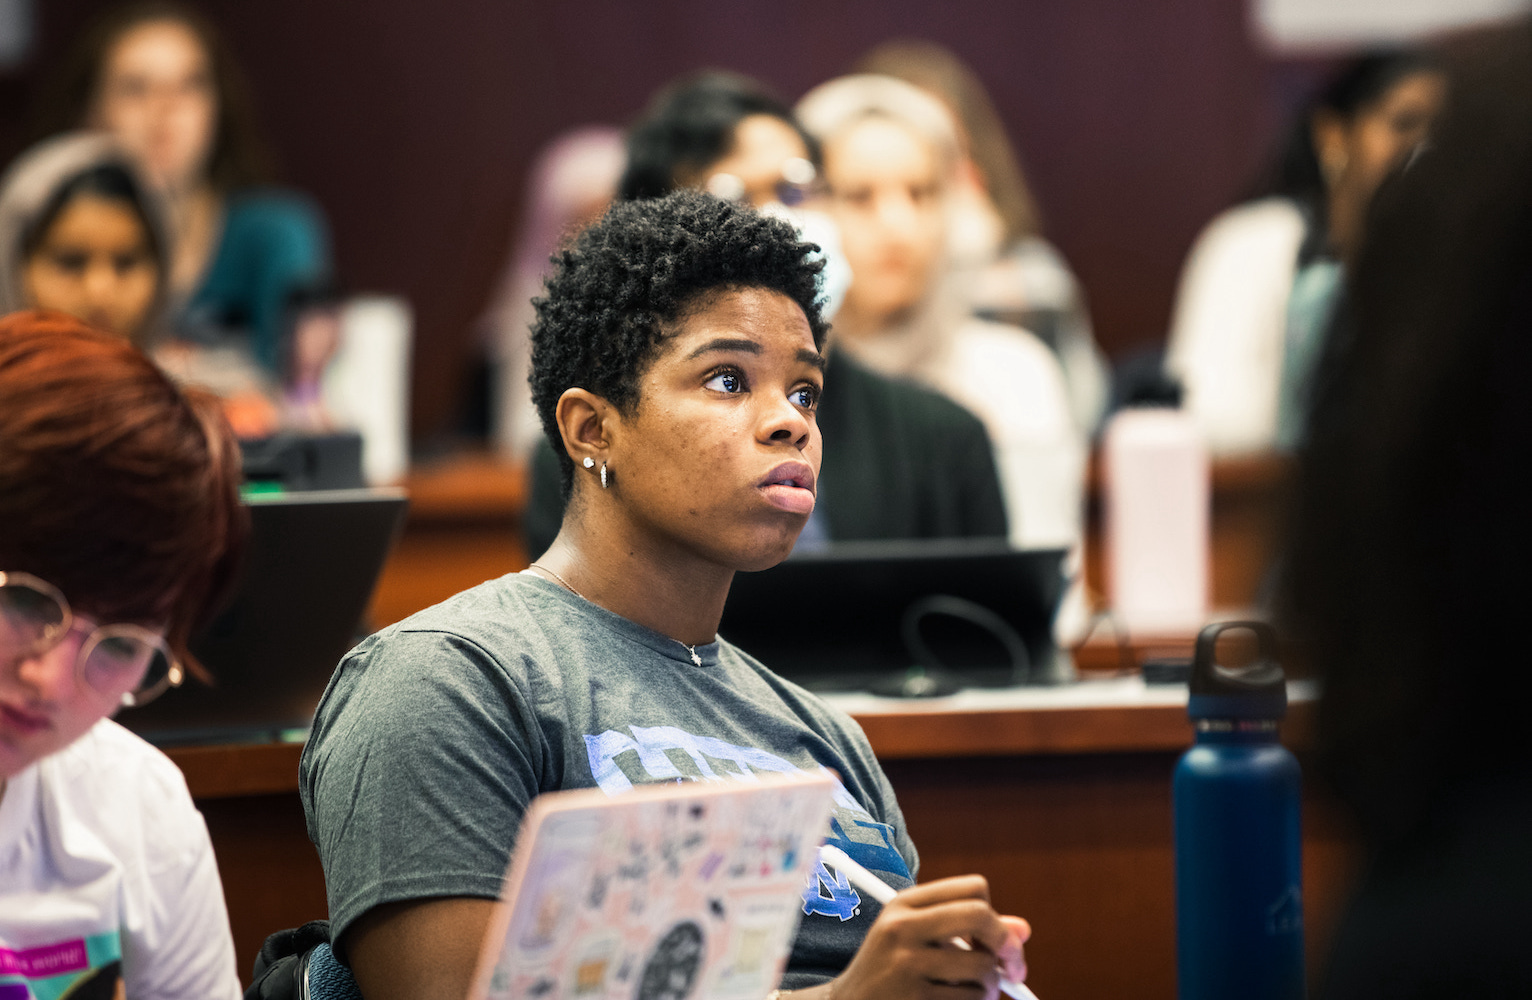 A UNC Eshelman School of Pharmacy student takes notes during class.